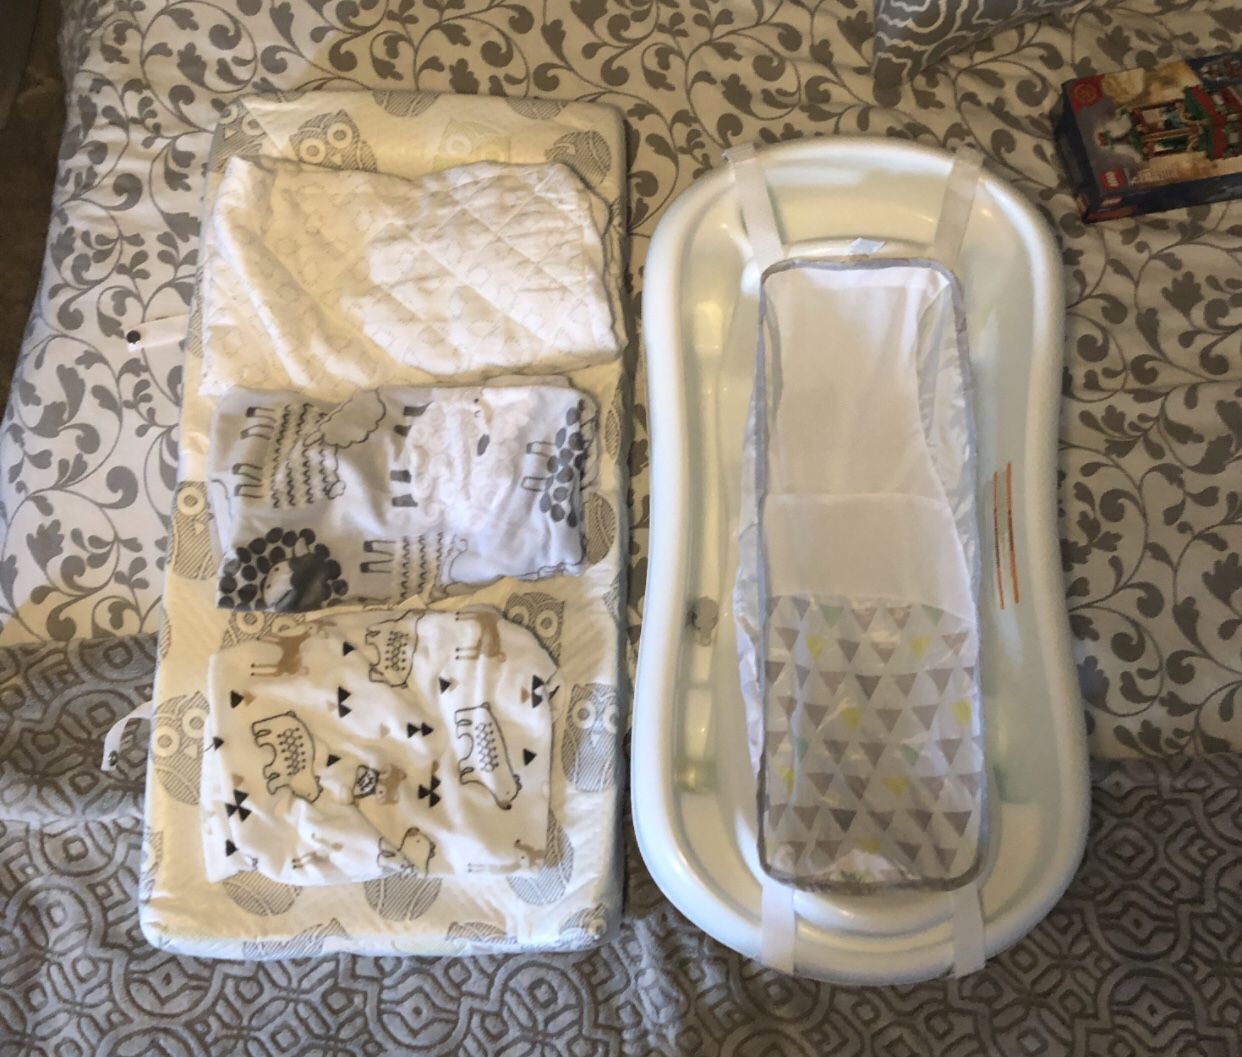 Baby Stroller, bassinet, tub, changing table mattress, mattress covers, tub seat Combo